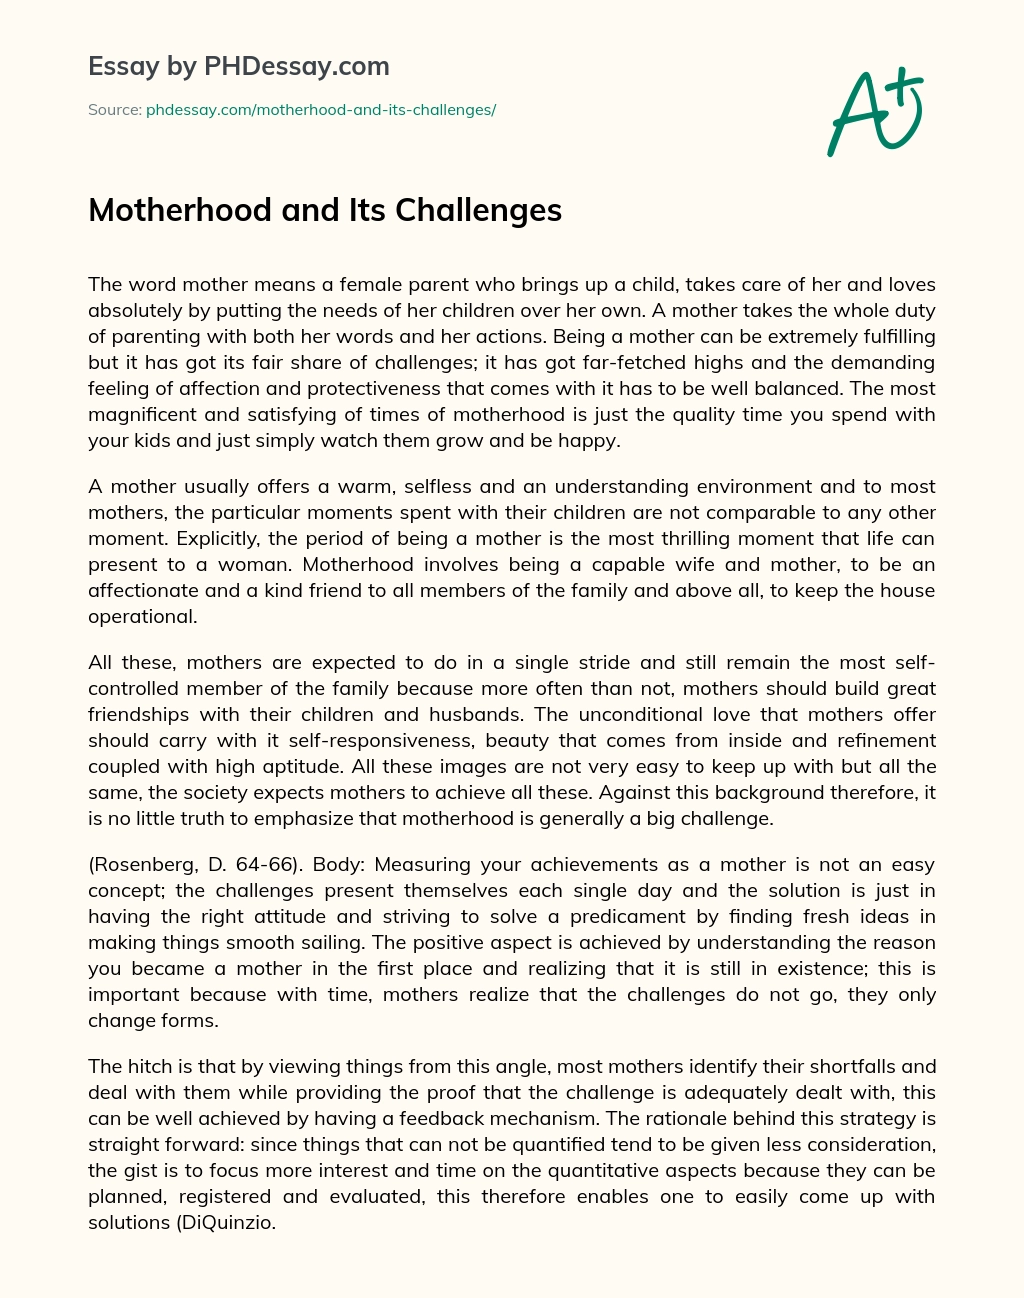 Motherhood and Its Challenges essay